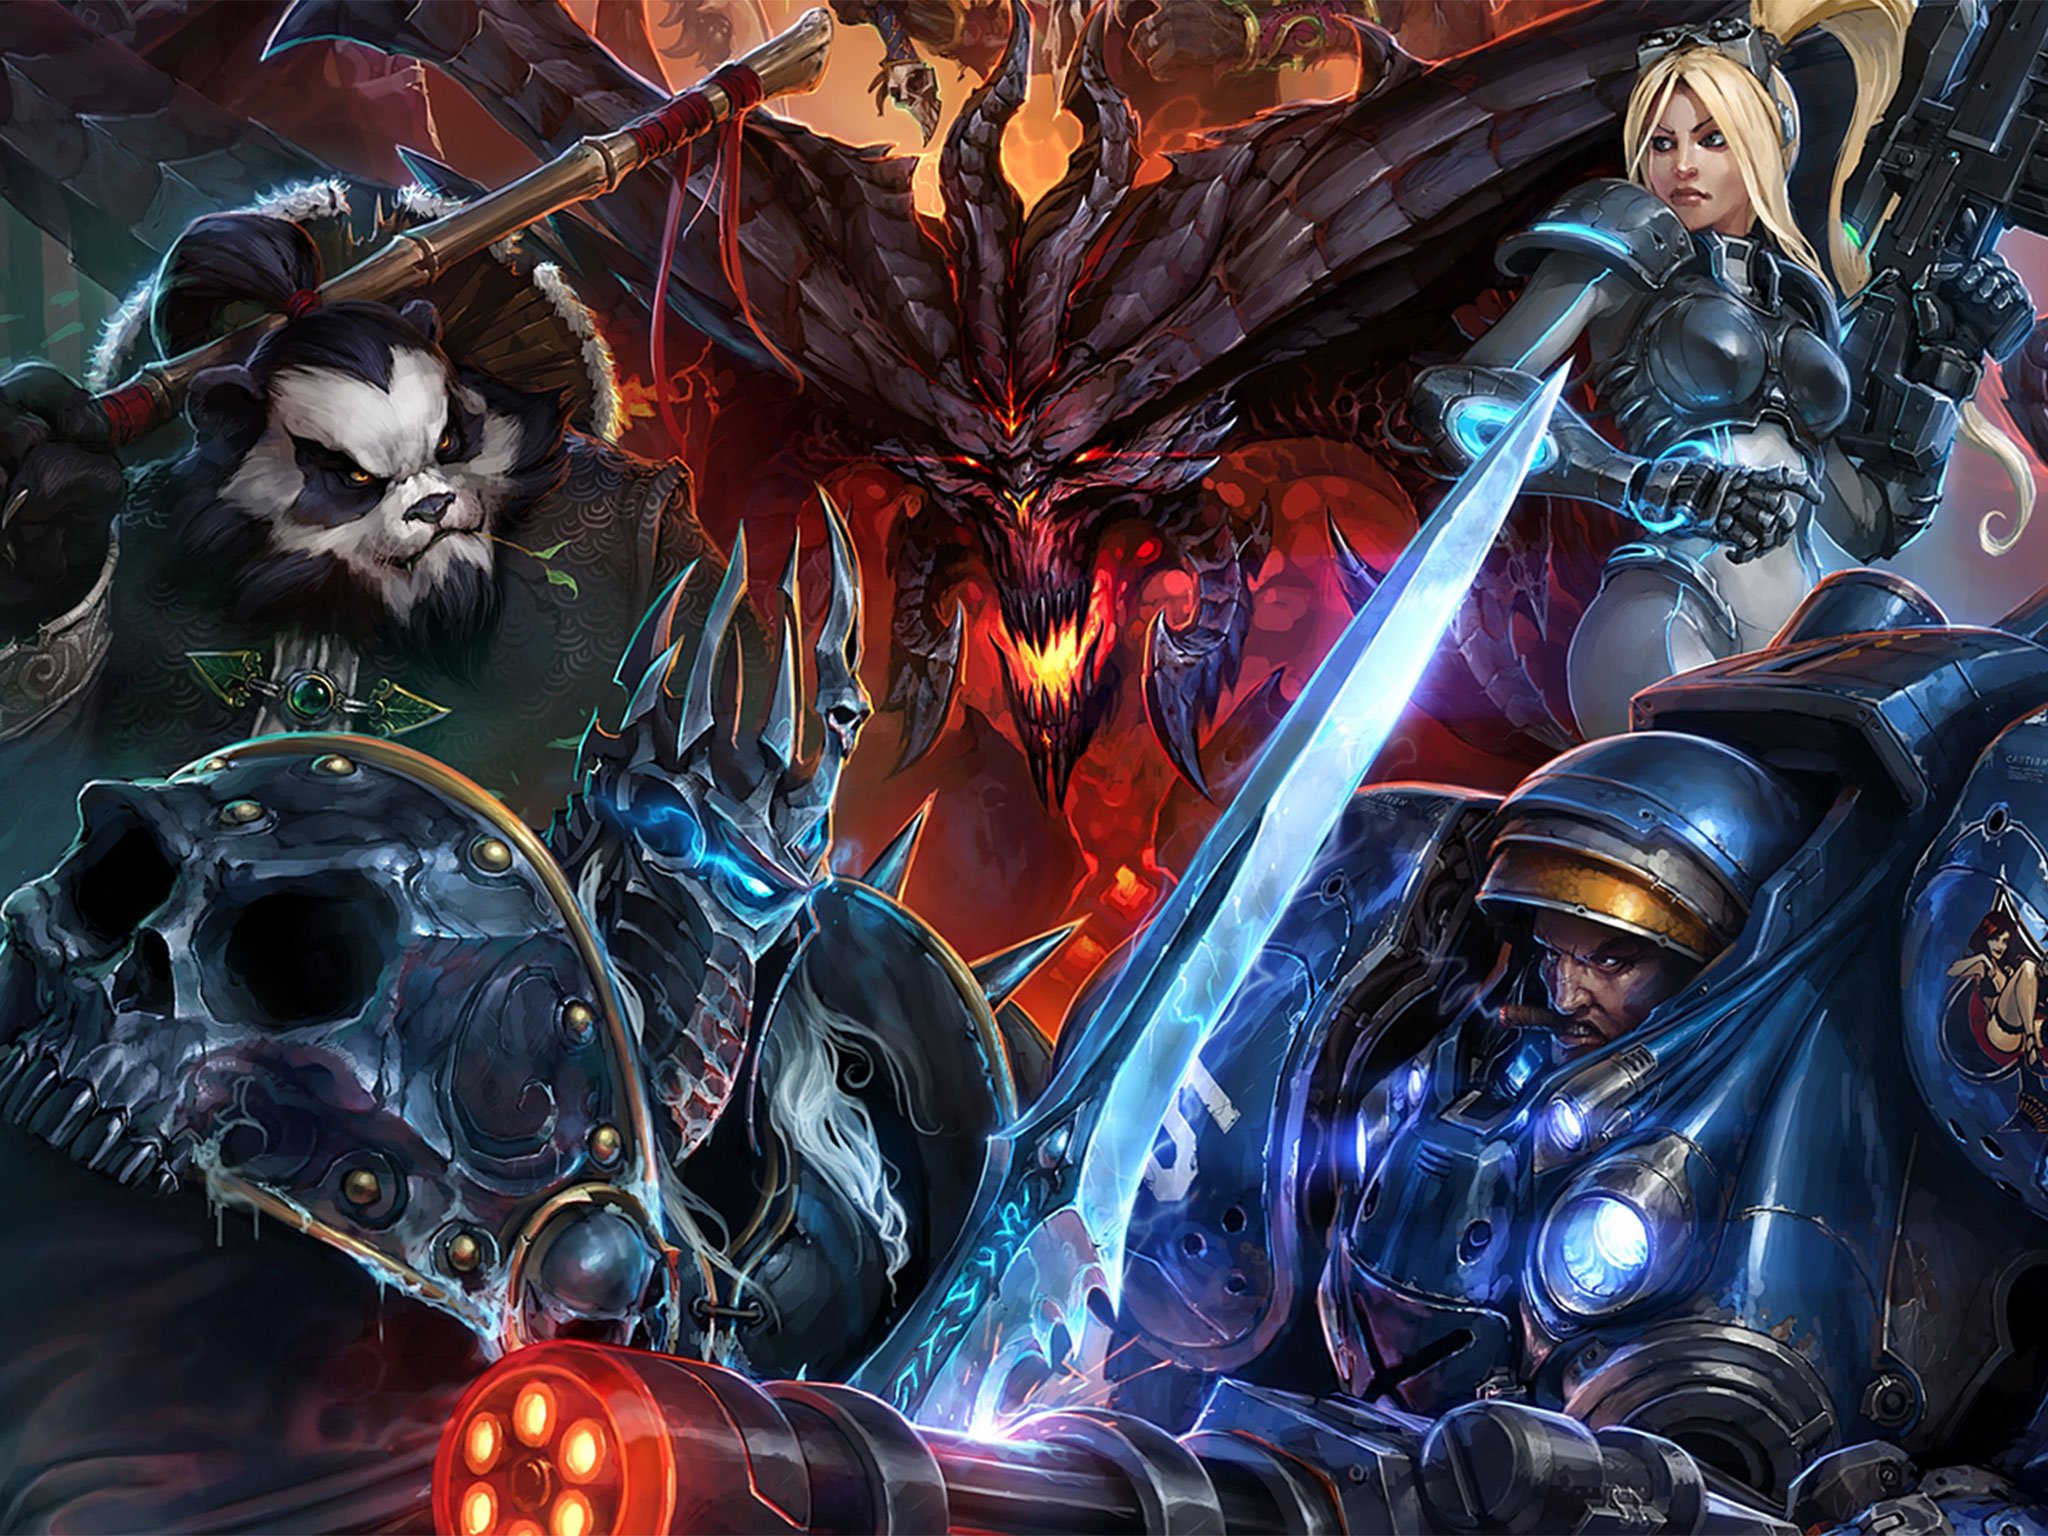 Heroes of the Storm: Tips and tricks for beginners at Blizzard's MOBA